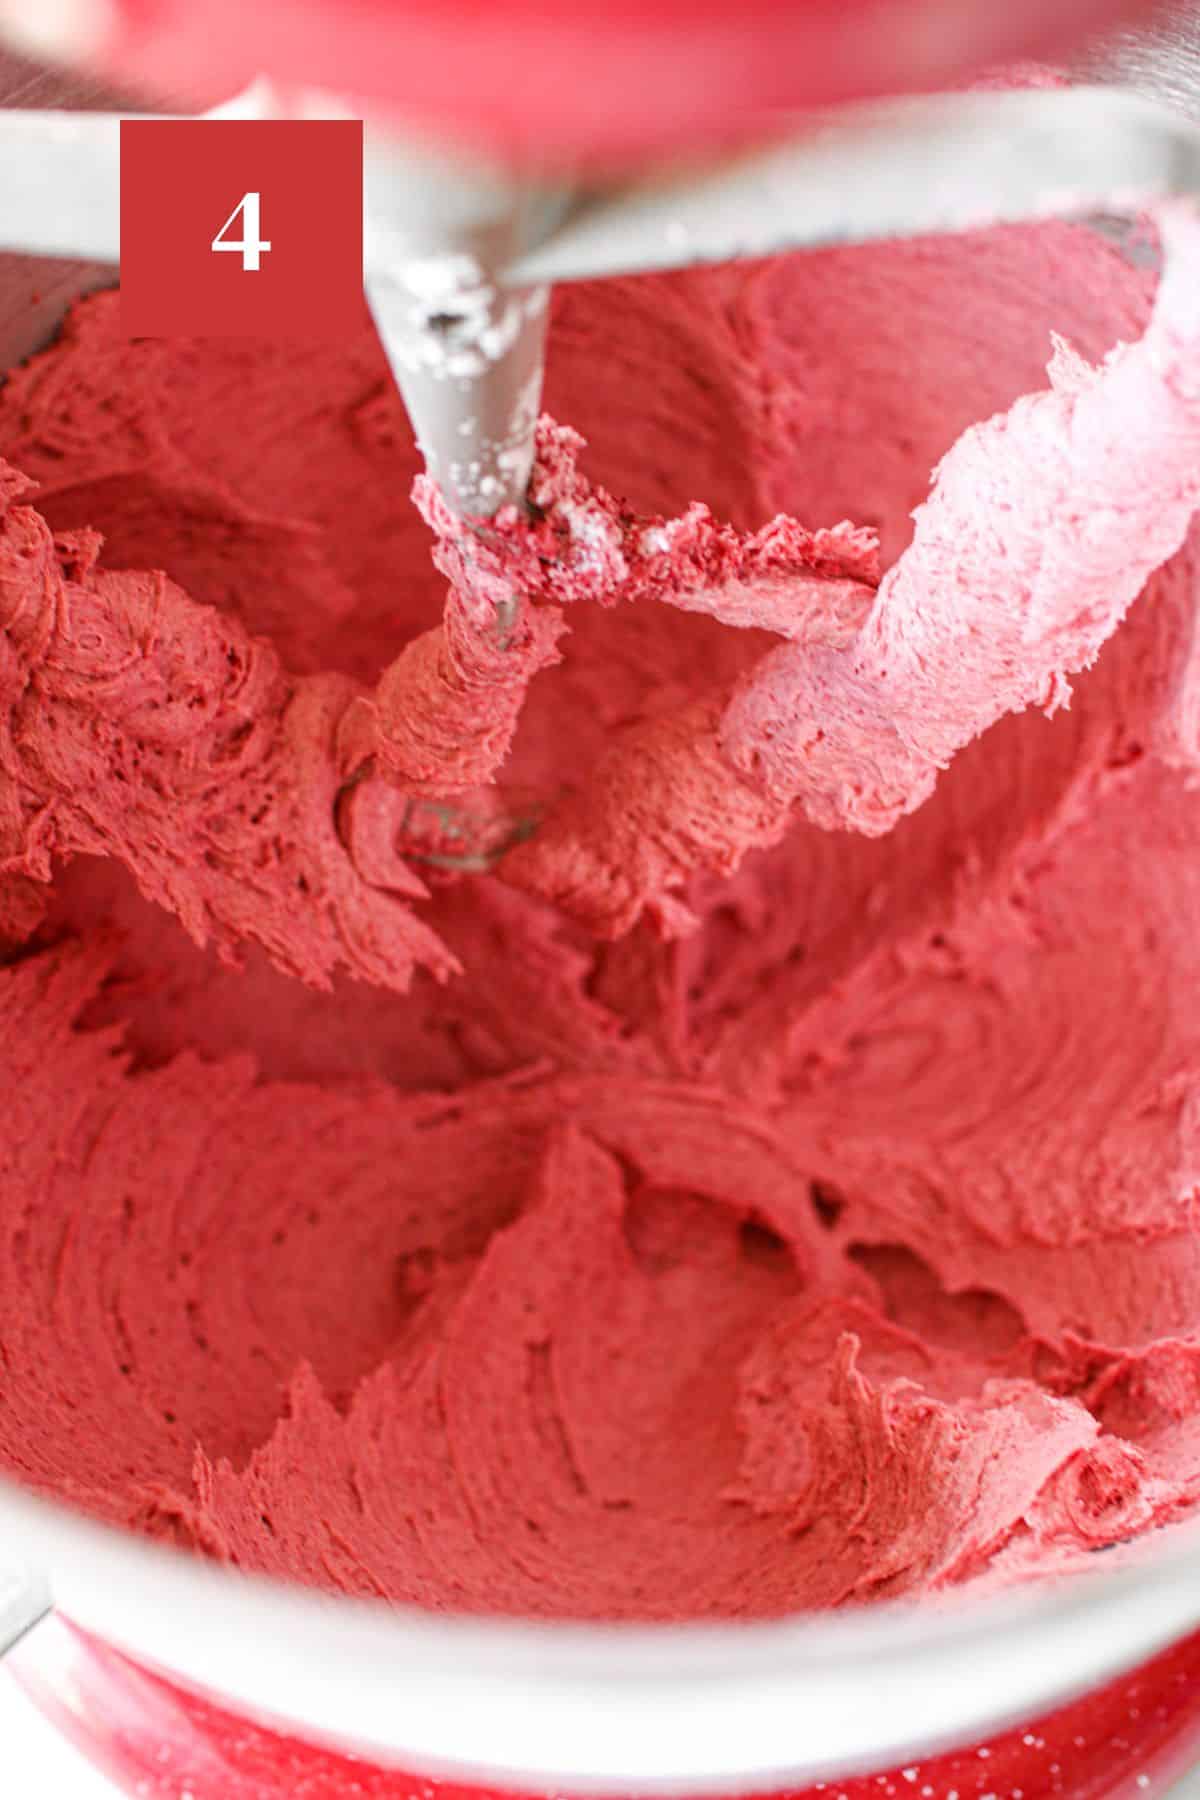 Raspberry buttercream frosting beaten in a large red stand mixer with beater attachment.  In the upper left corner is a dark red square with a white '4' in the center.